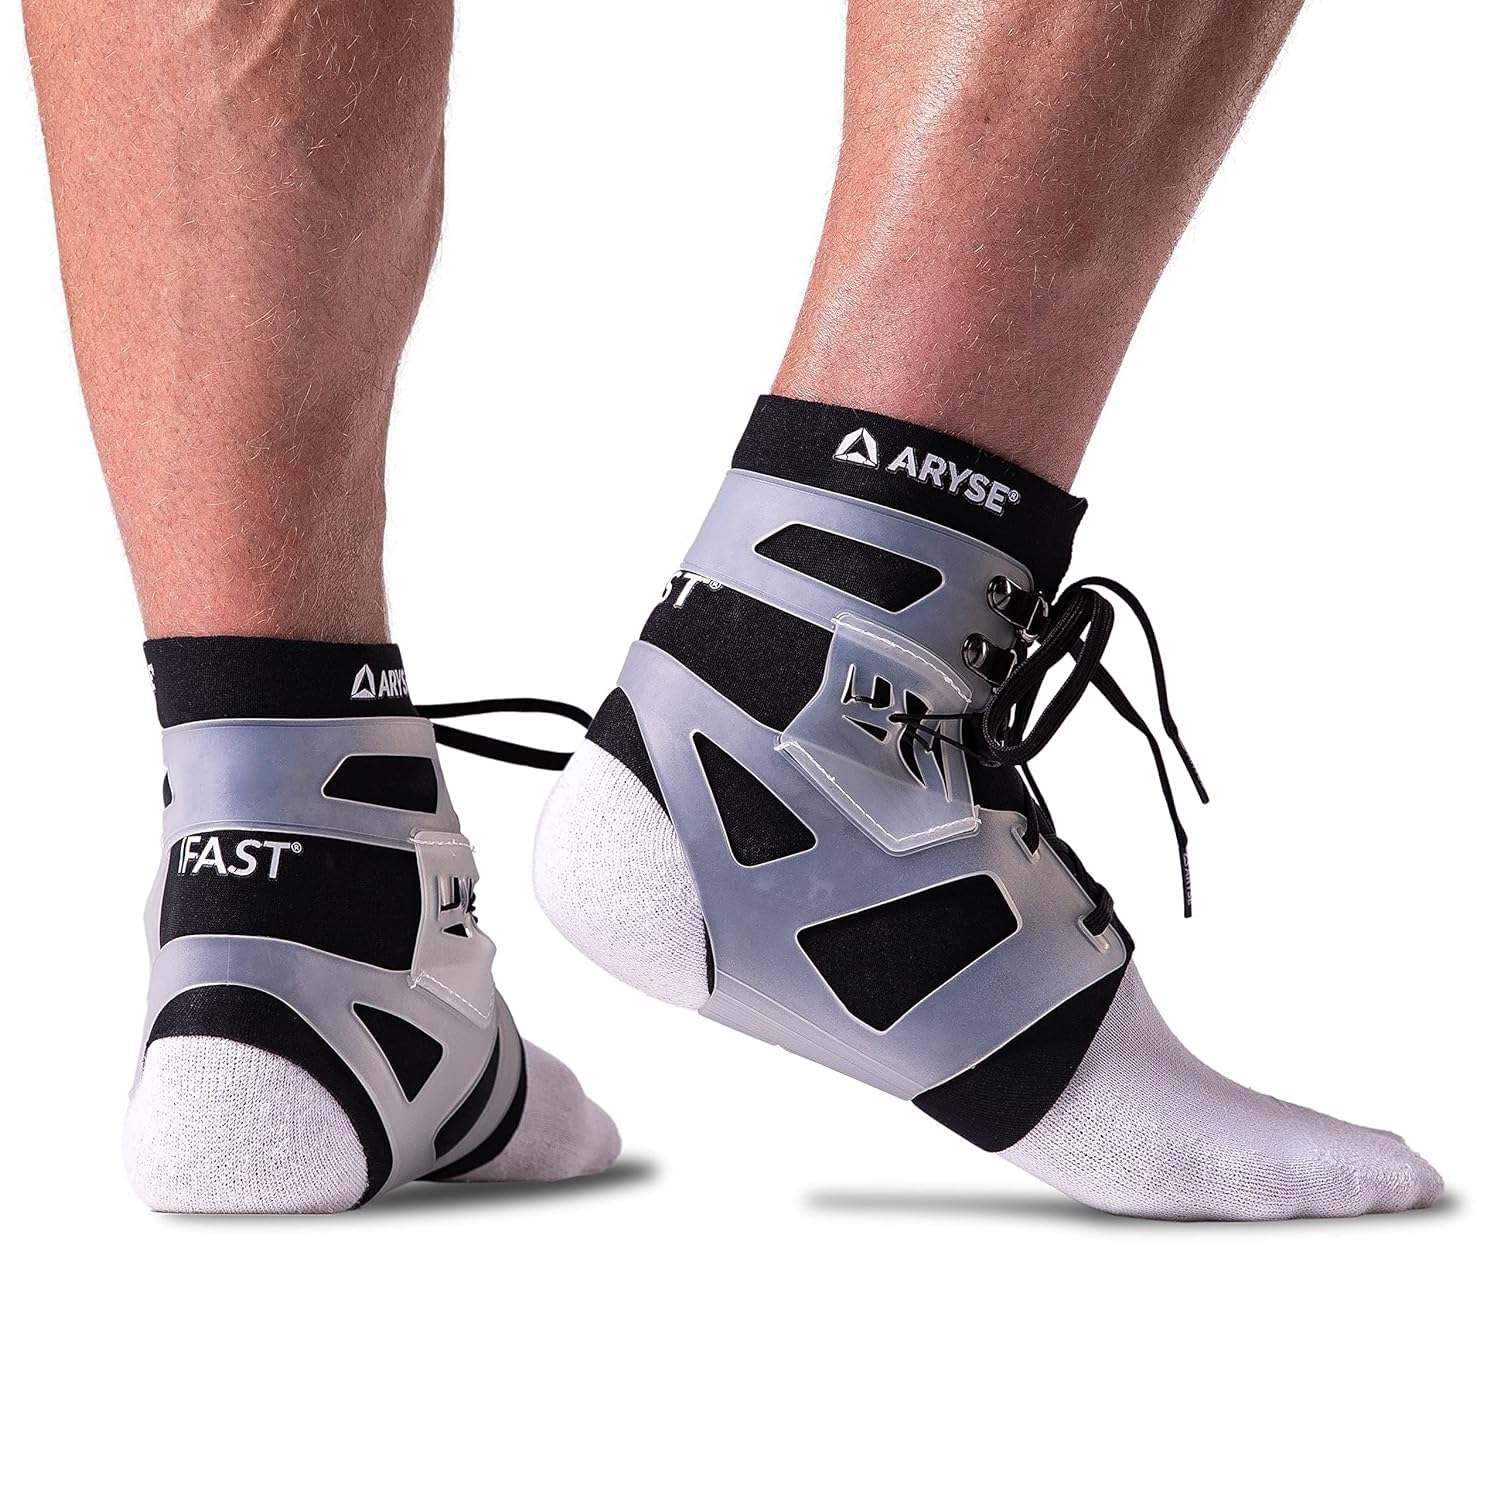 ARYSE IFAST Ankle Brace Review